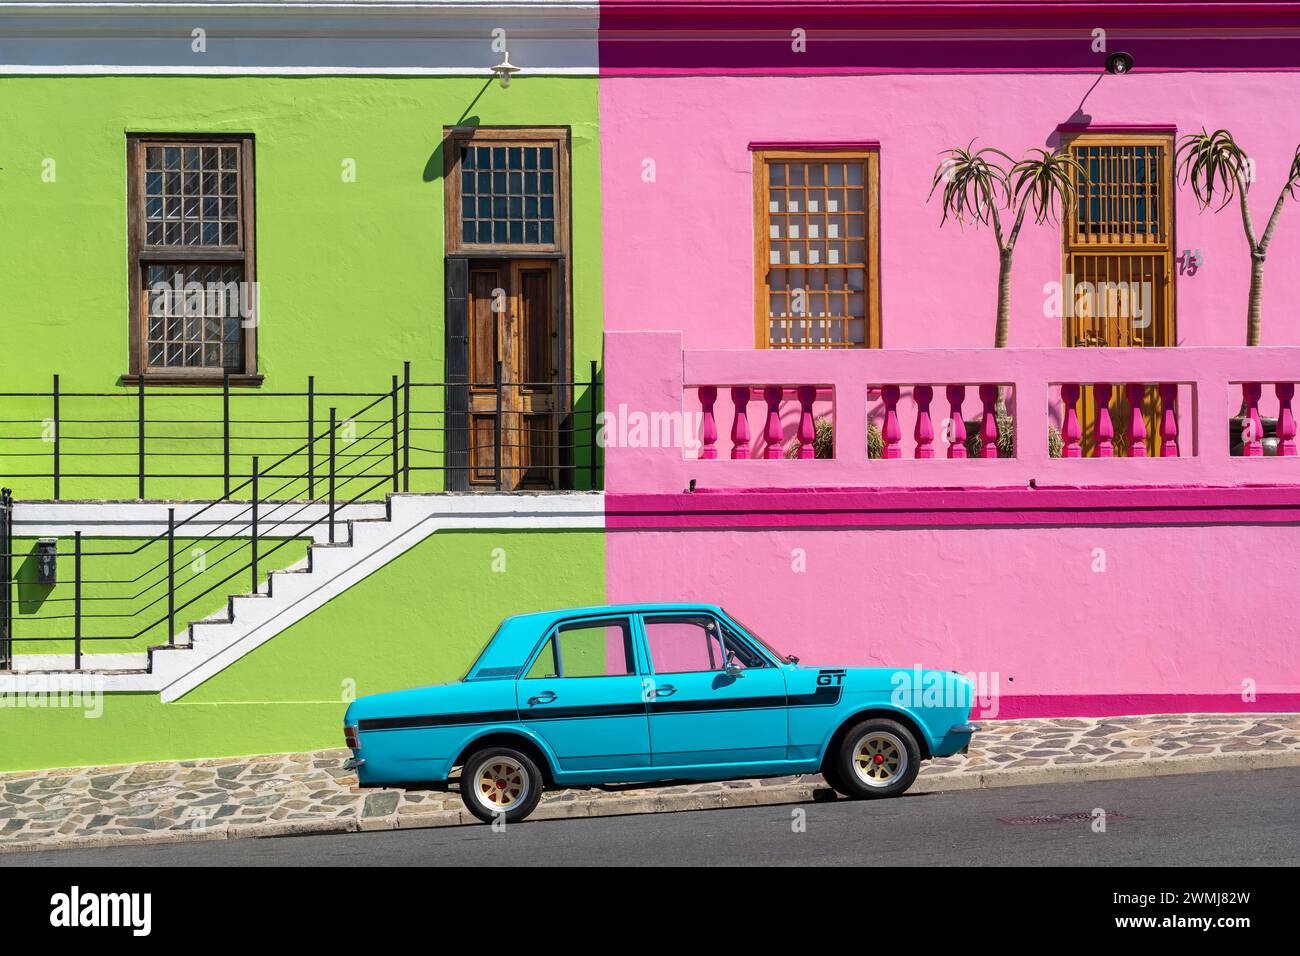 Vintage car in the historic Bo-Kaap neighbourhood, Cape Town, South Africa. Stock Photo